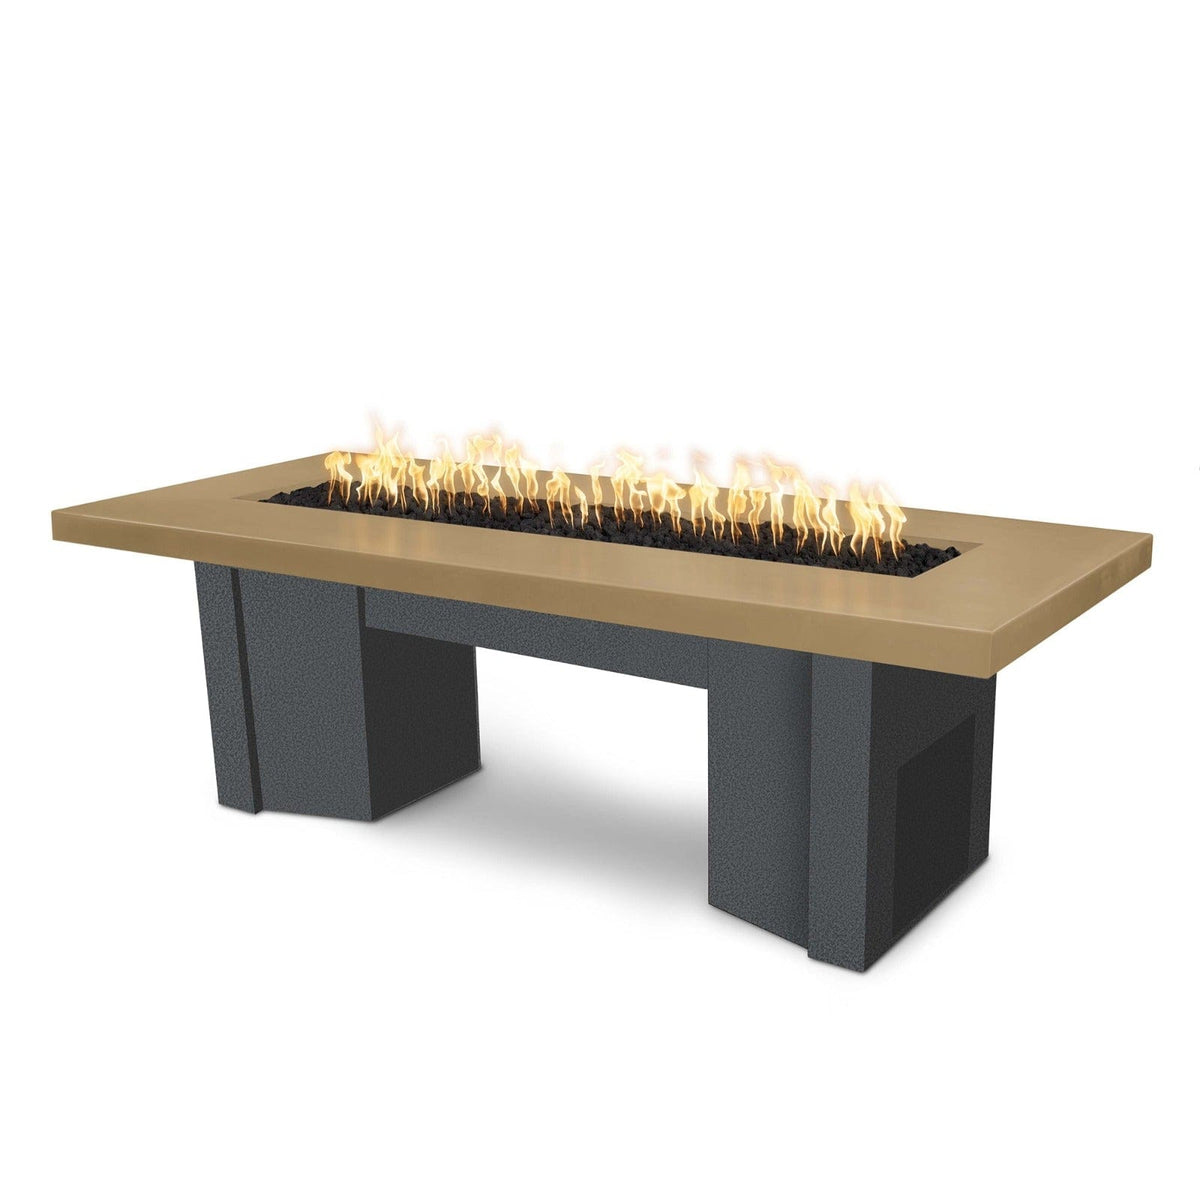 The Outdoor Plus Fire Features Brown (-BRN) / Silver Vein Powder Coated Steel (-SLV) The Outdoor Plus 60&quot; Alameda Fire Table Smooth Concrete in Liquid Propane - Match Lit with Flame Sense System / OPT-ALMGFRC60FSML-LP